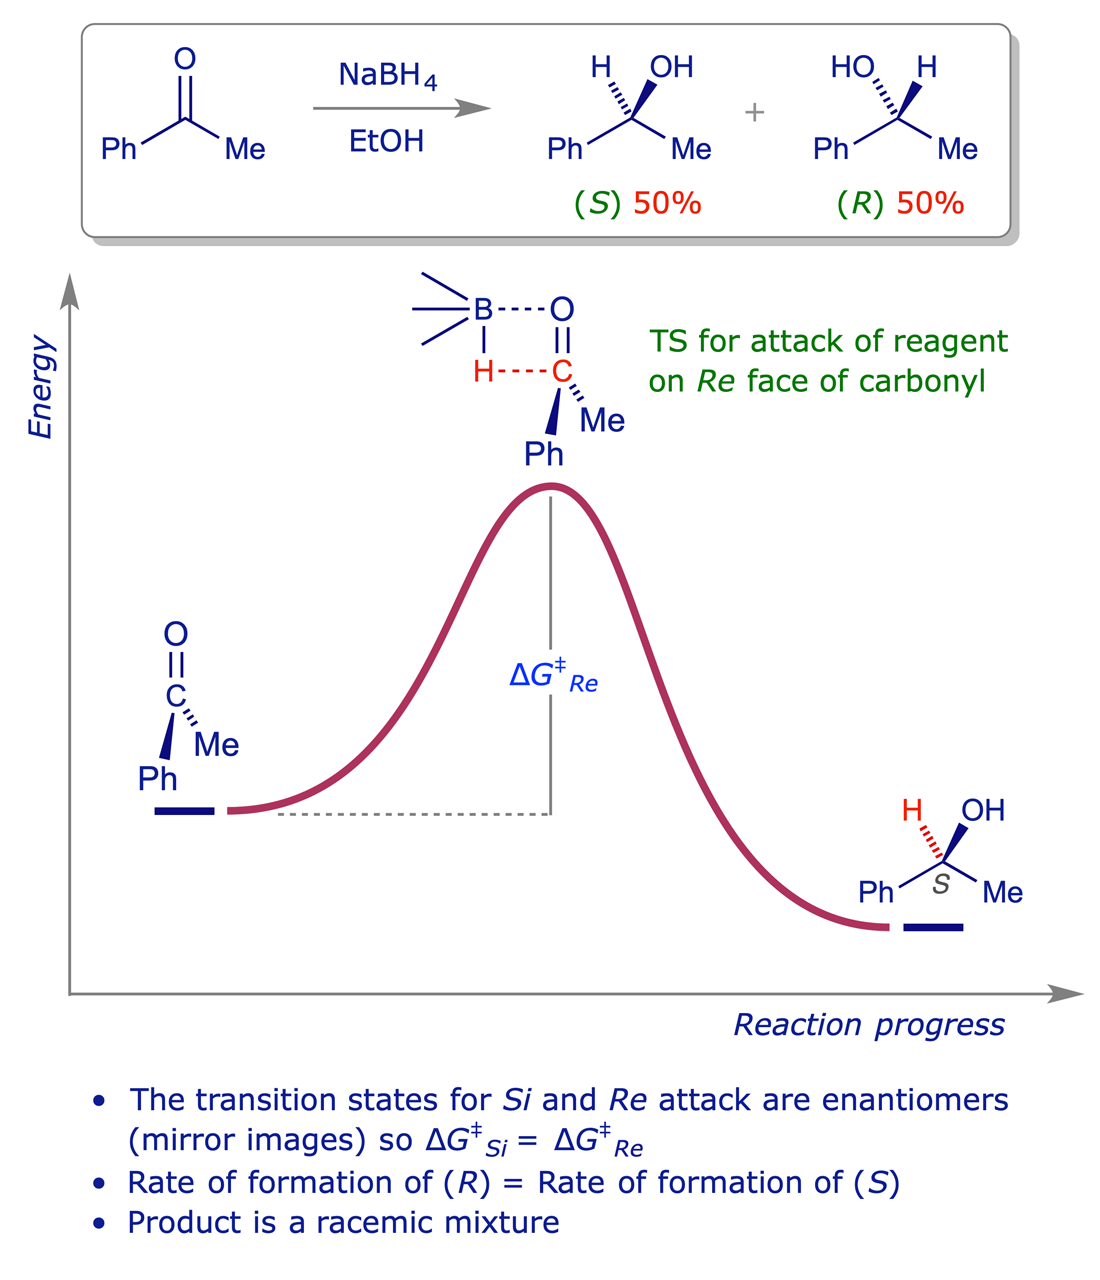 Graphical representation of the energetics of the reaction of 1-phenylethanone (acetophenone) with sodium borohydride